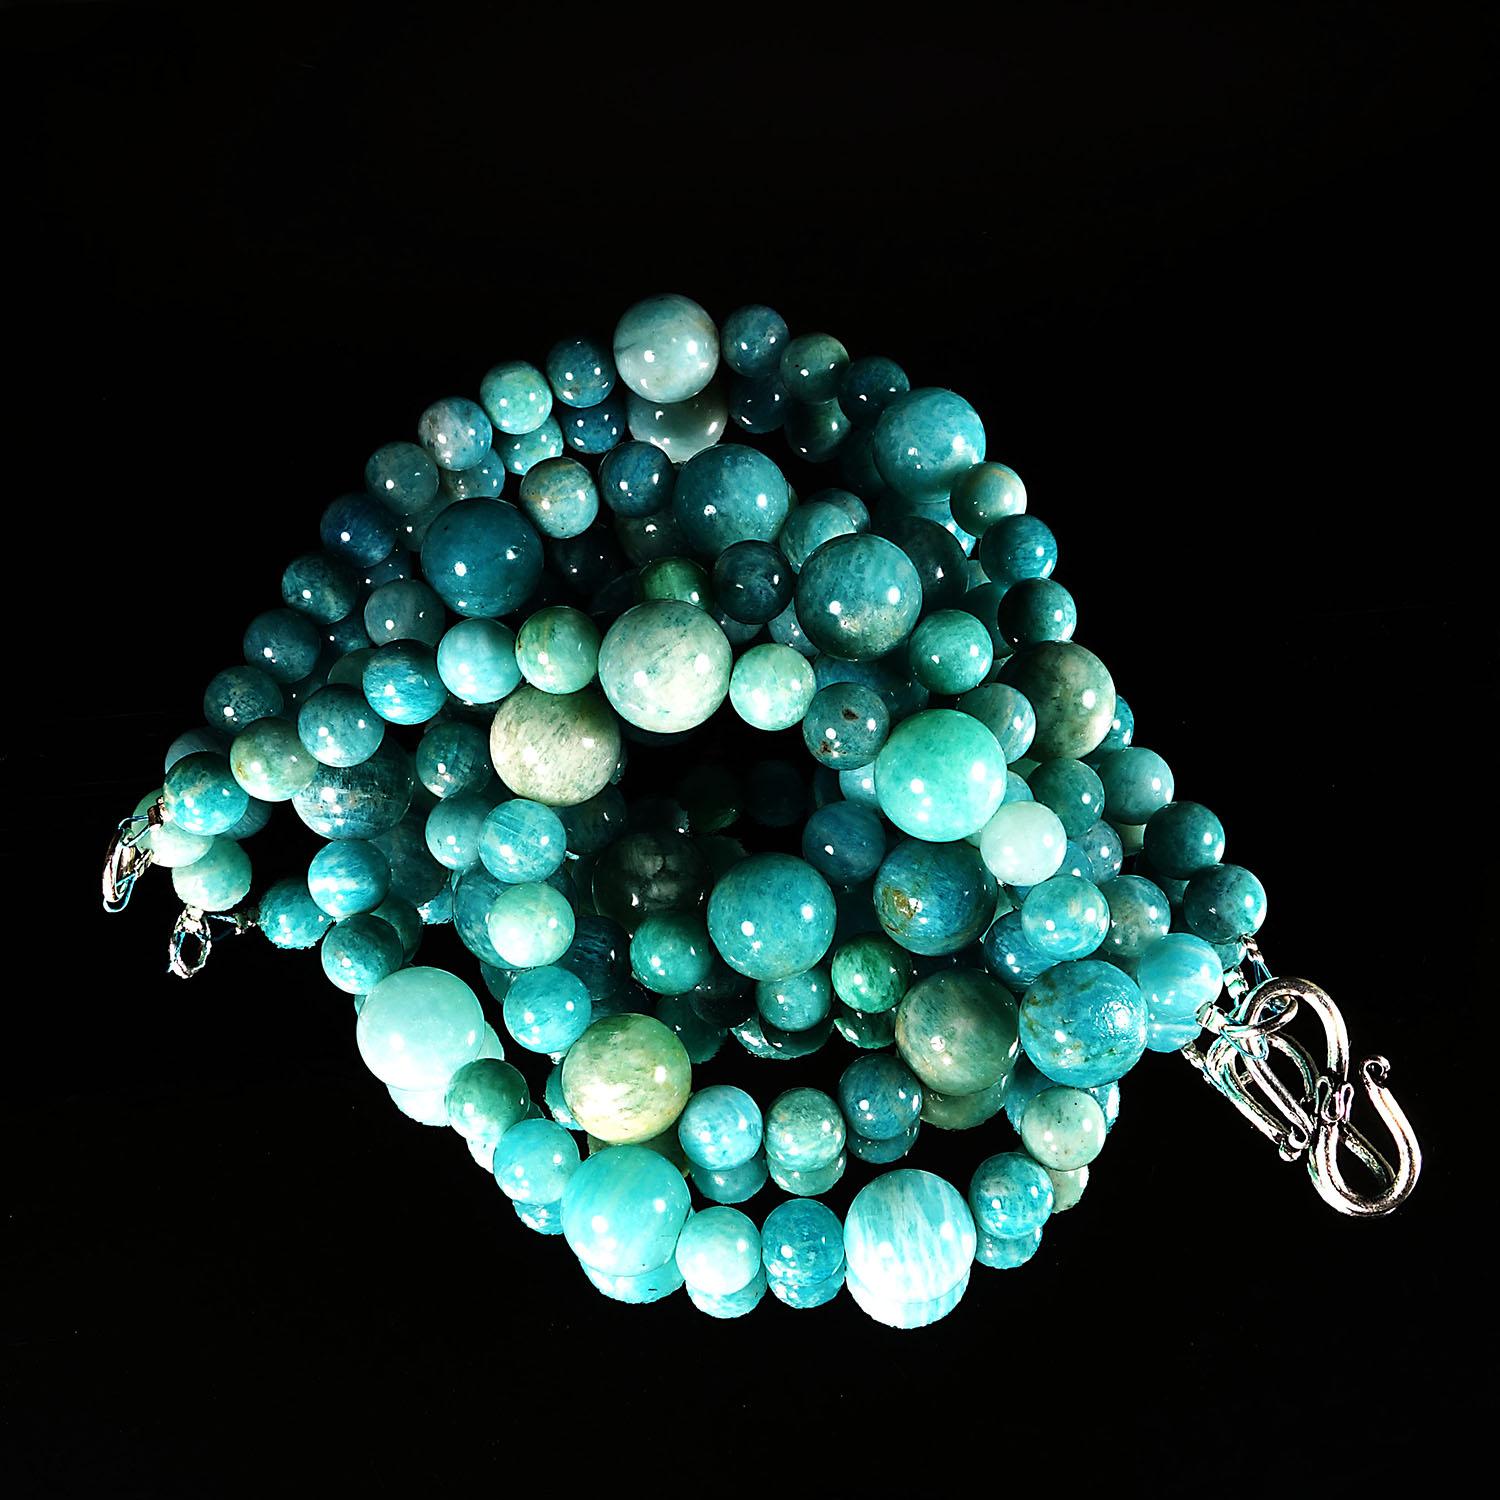 Elegant double strand necklace of highly polished Amazonite.  This gorgeous necklace features two sizes of Amazonite in a lovely design, 12MM and 8MM.  The 20 inch Amazonite necklace is secured with a silver tone hook and eye clasp.

Amazonite is a